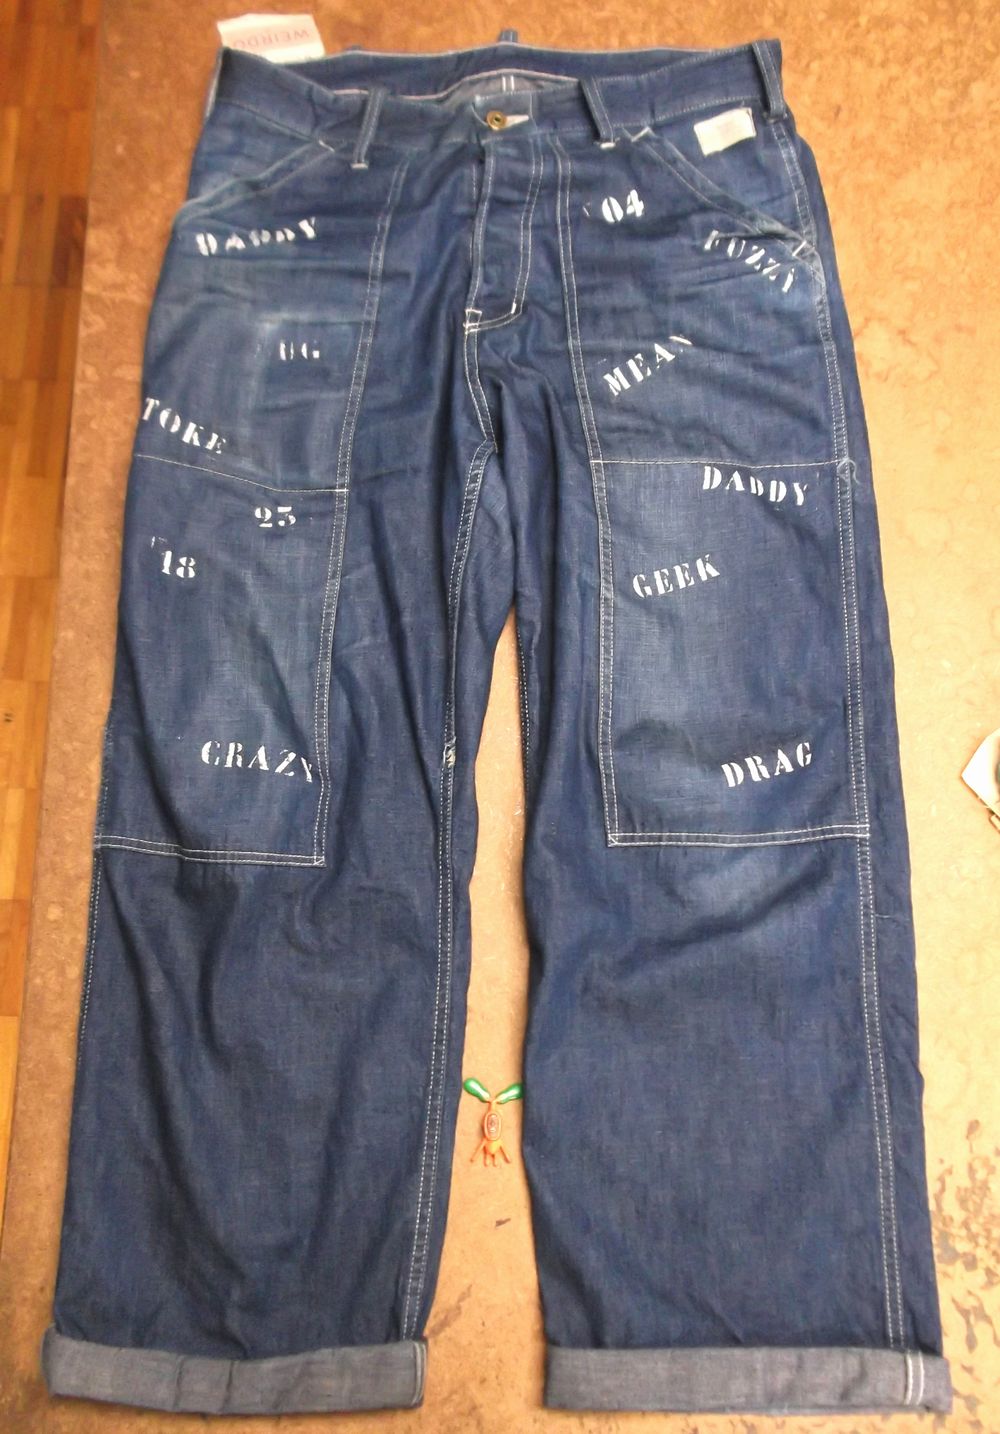 jeans1184-1